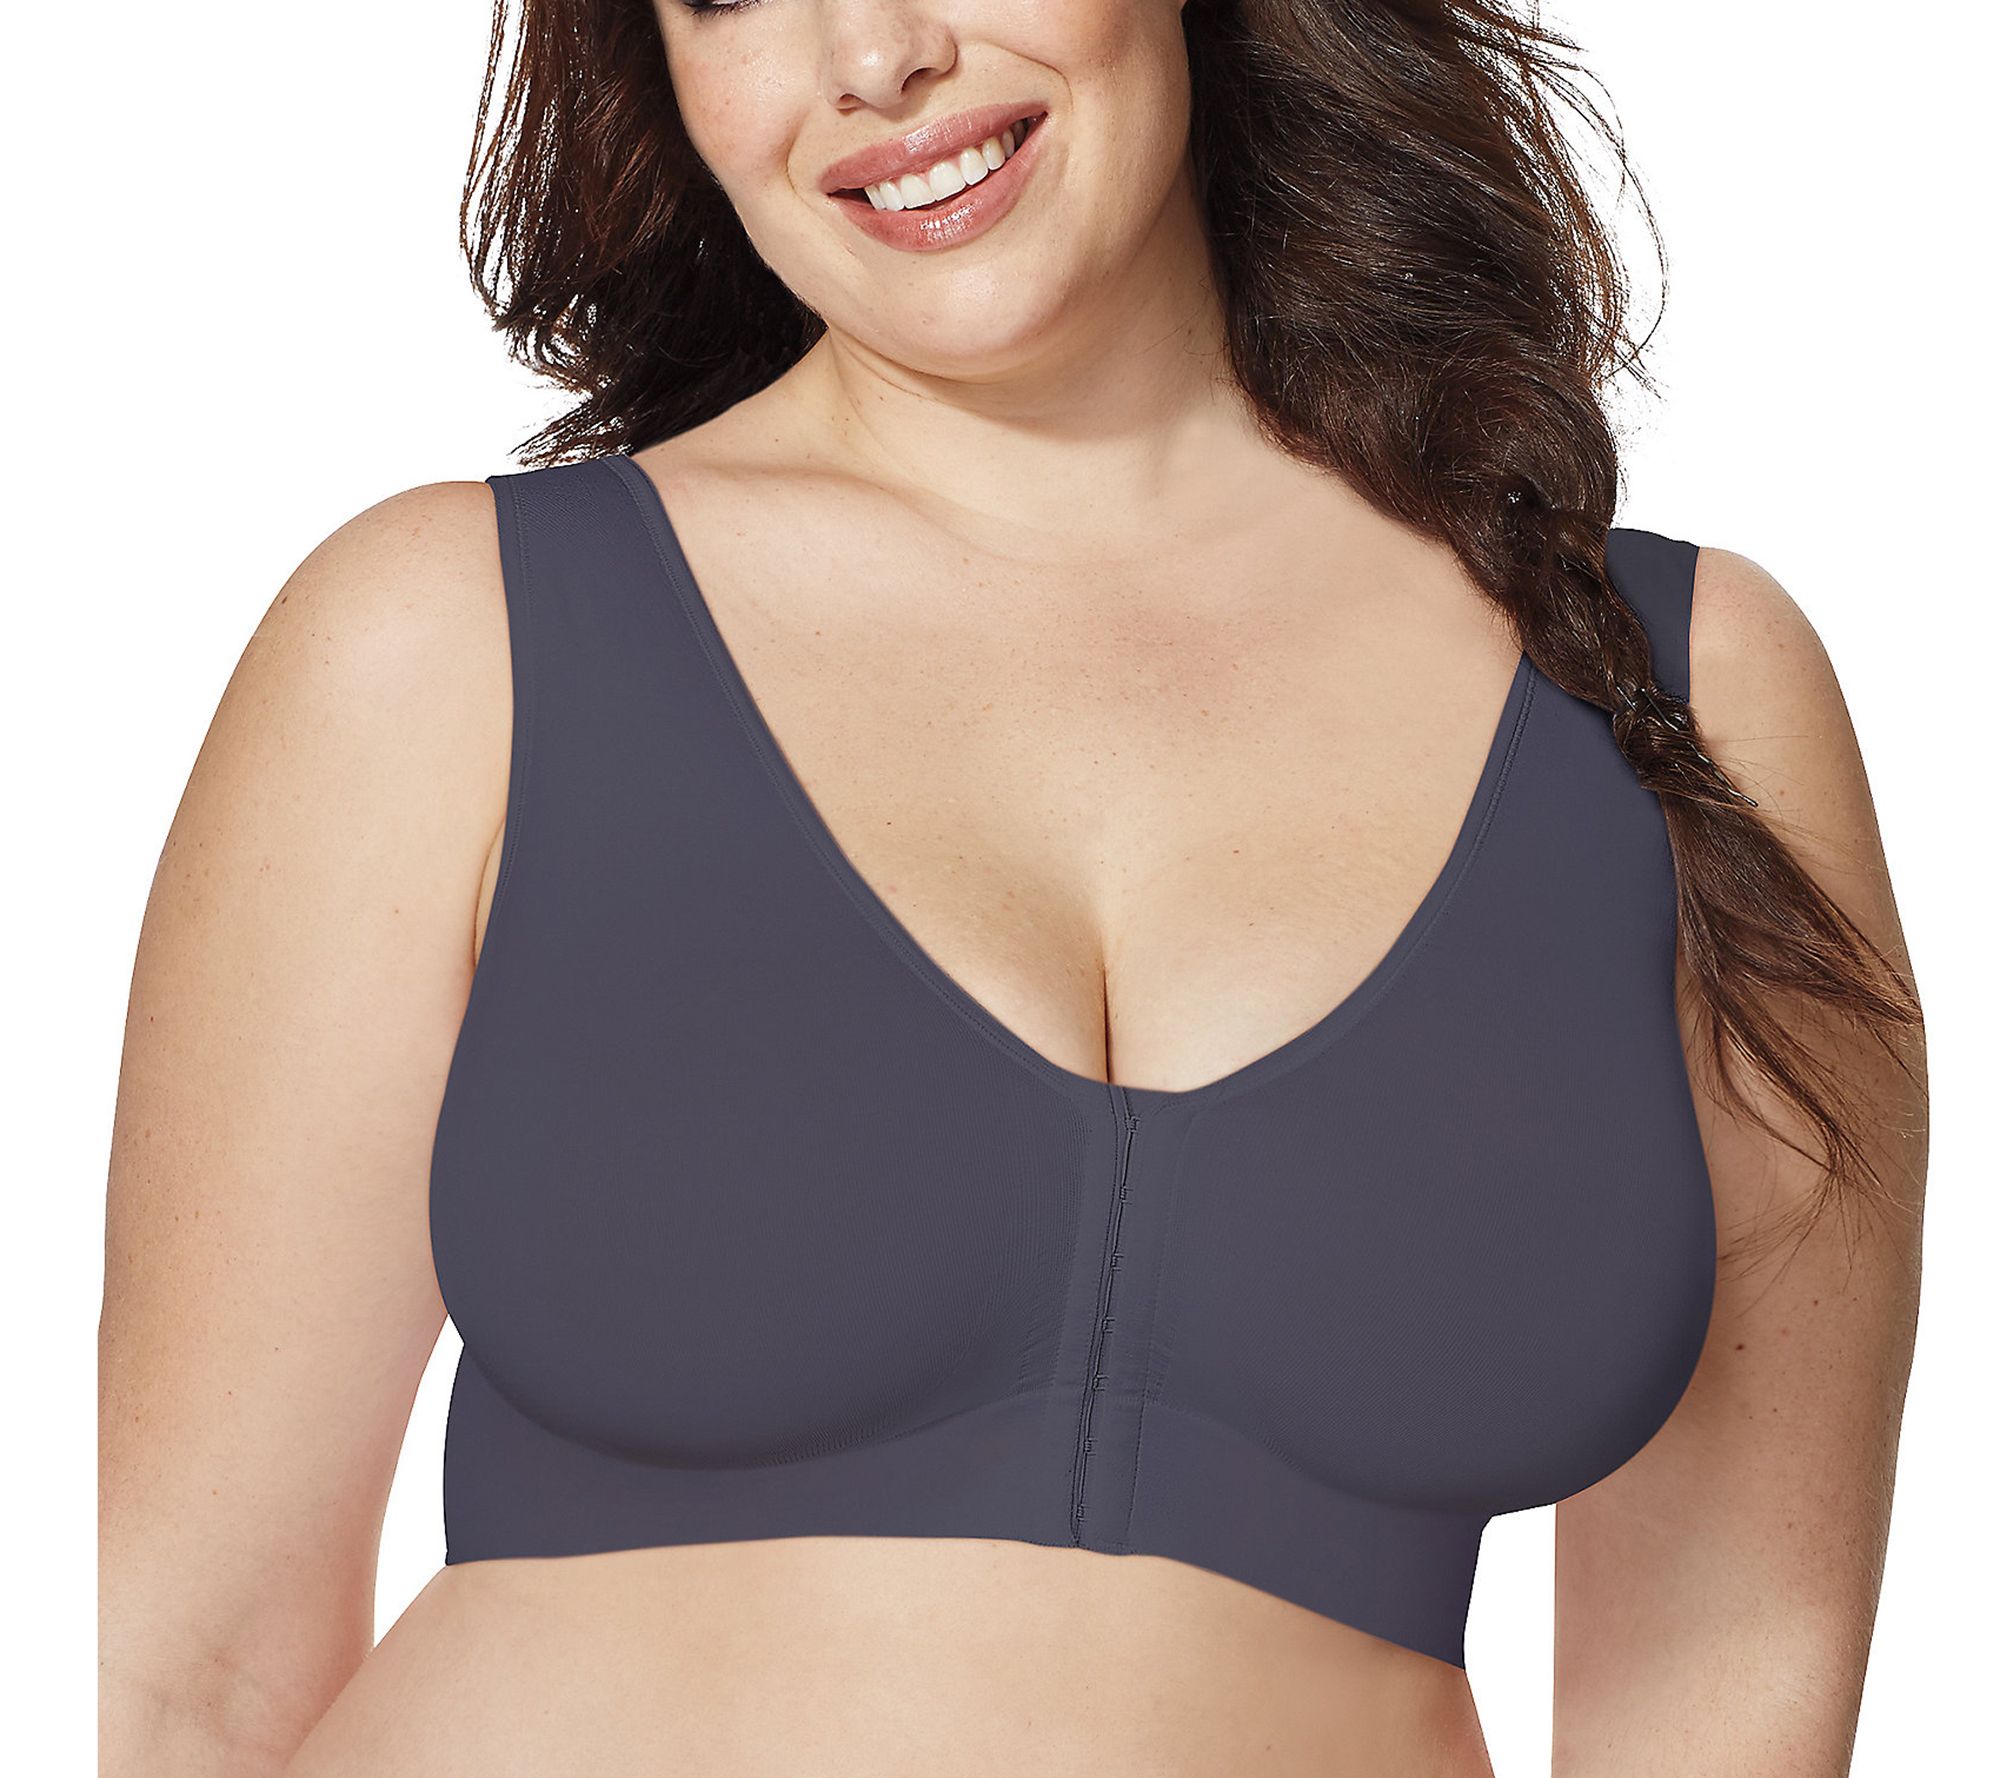 Hanes Just My Size Pure Comfort Front-Close Seamless Bra White 1X Women's